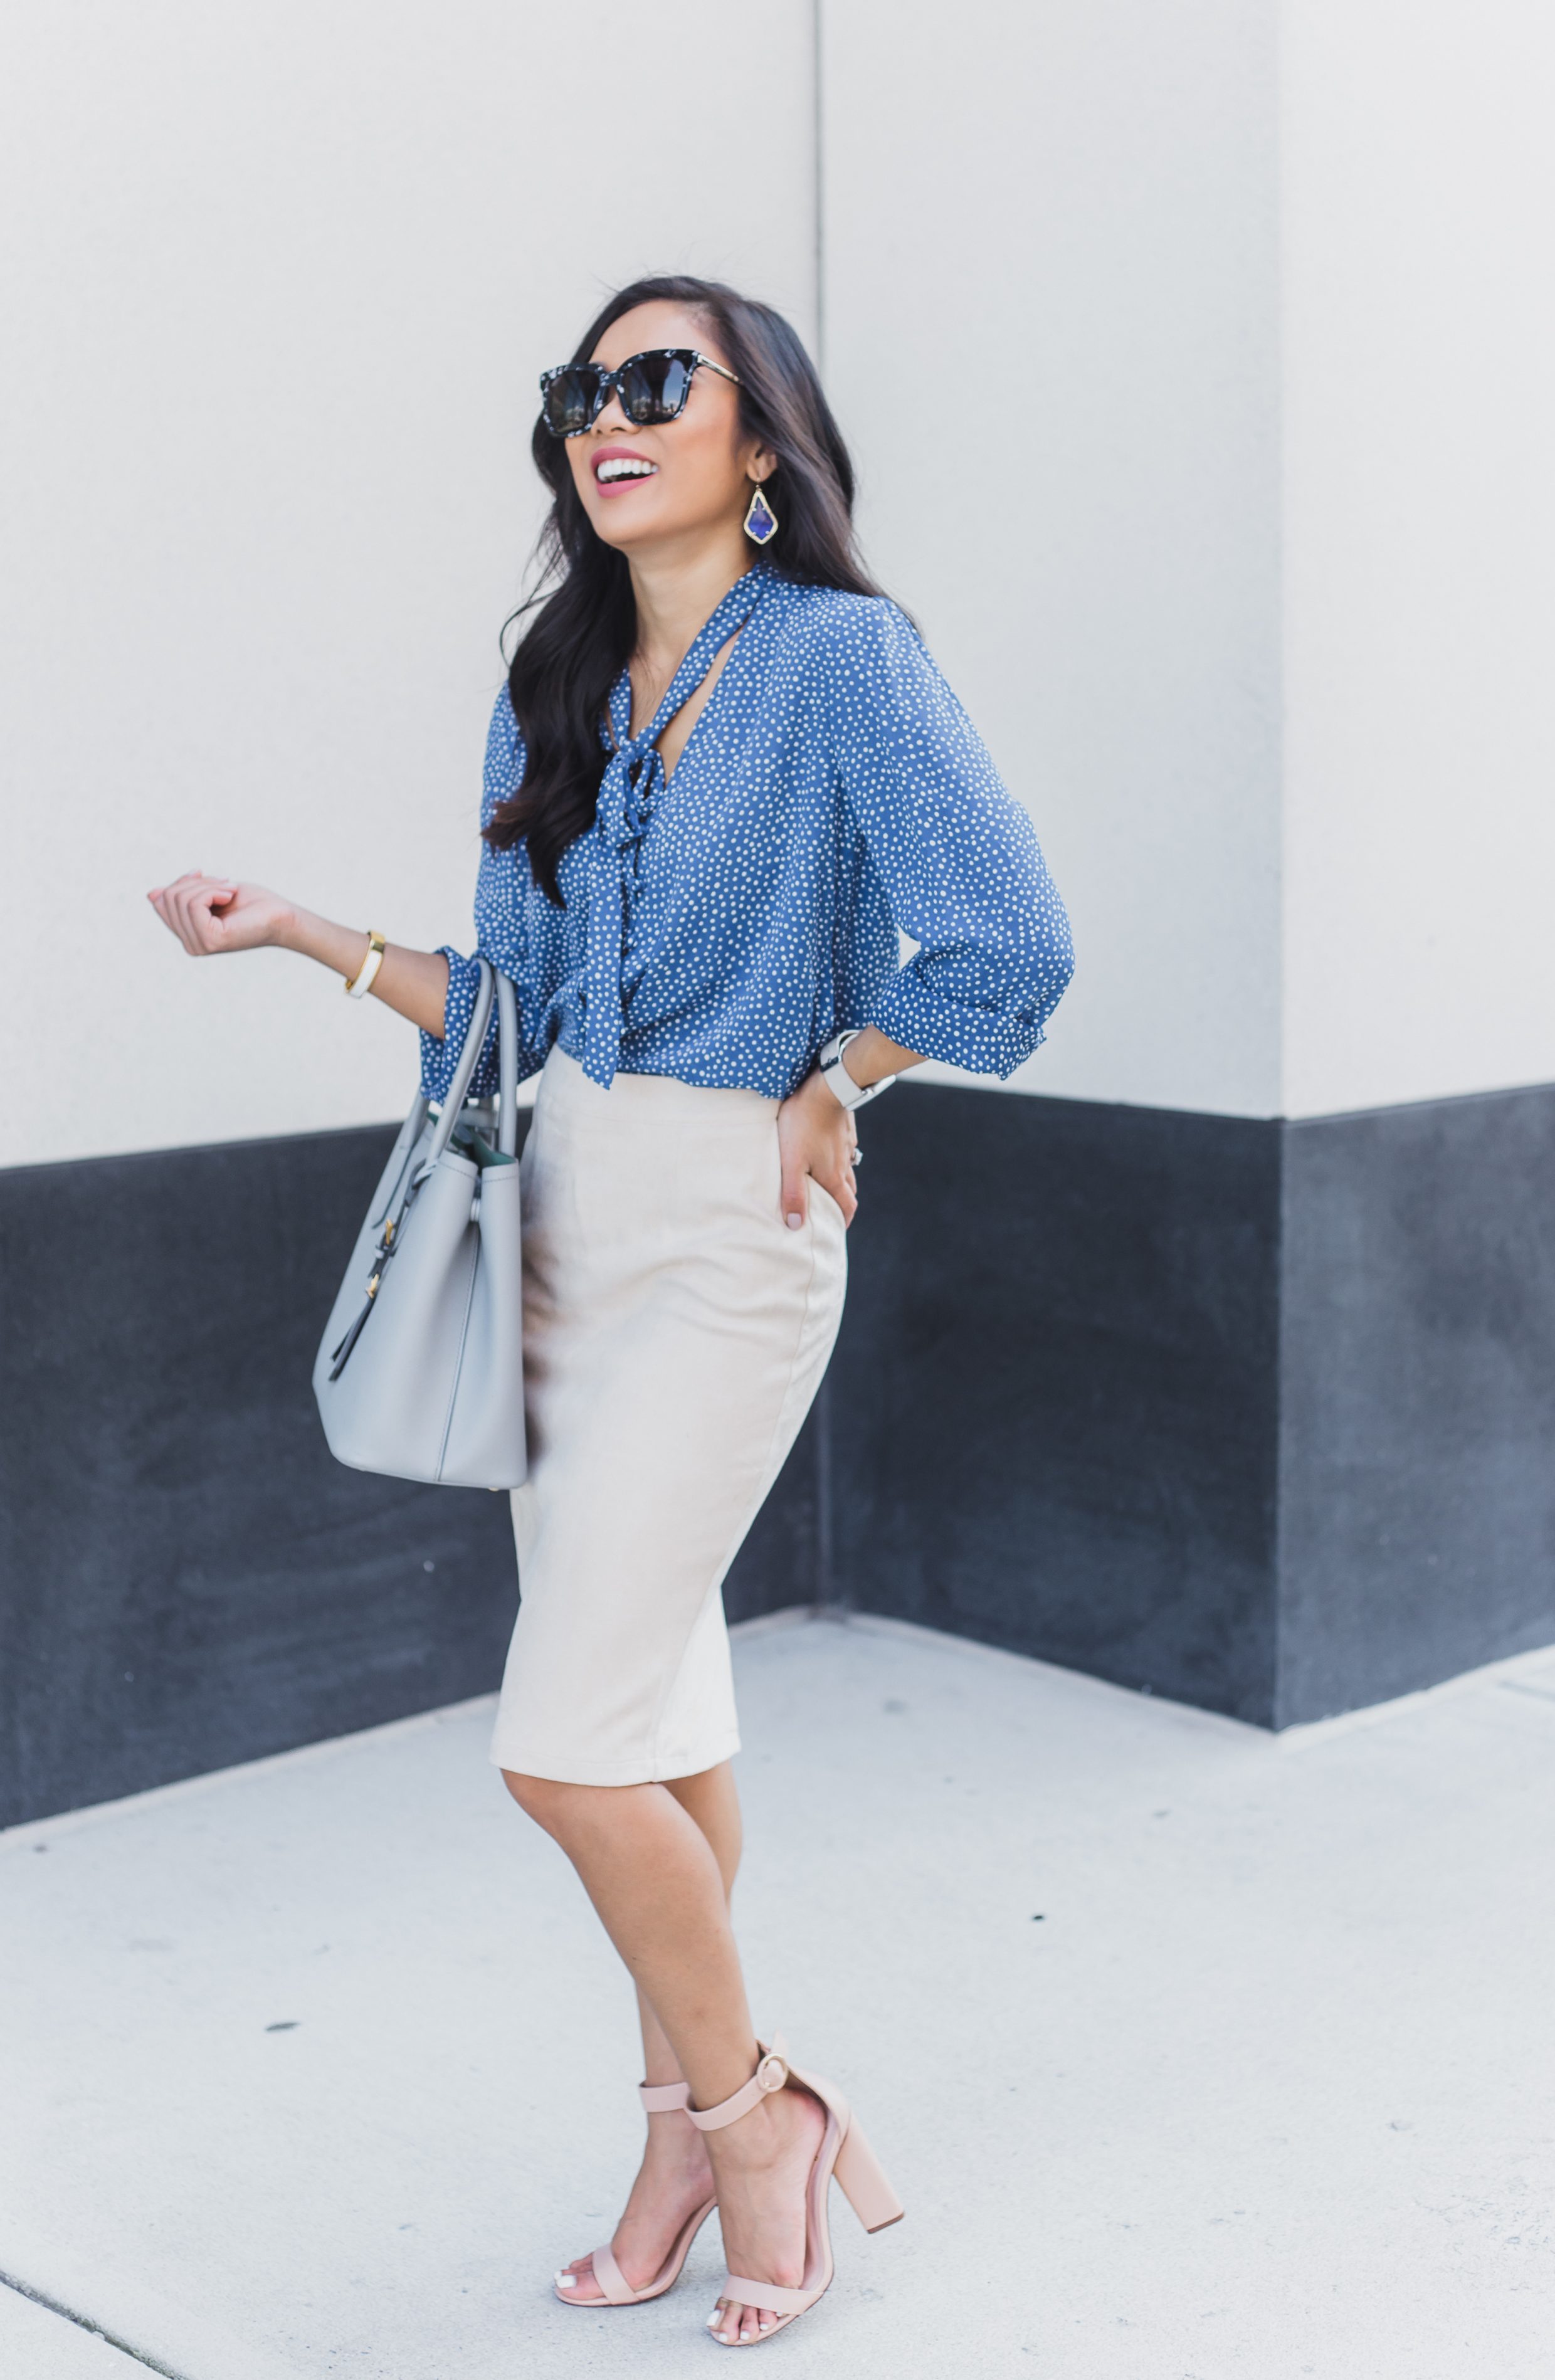 COLOR & CHIC | Work wear with blue polka dots and suede